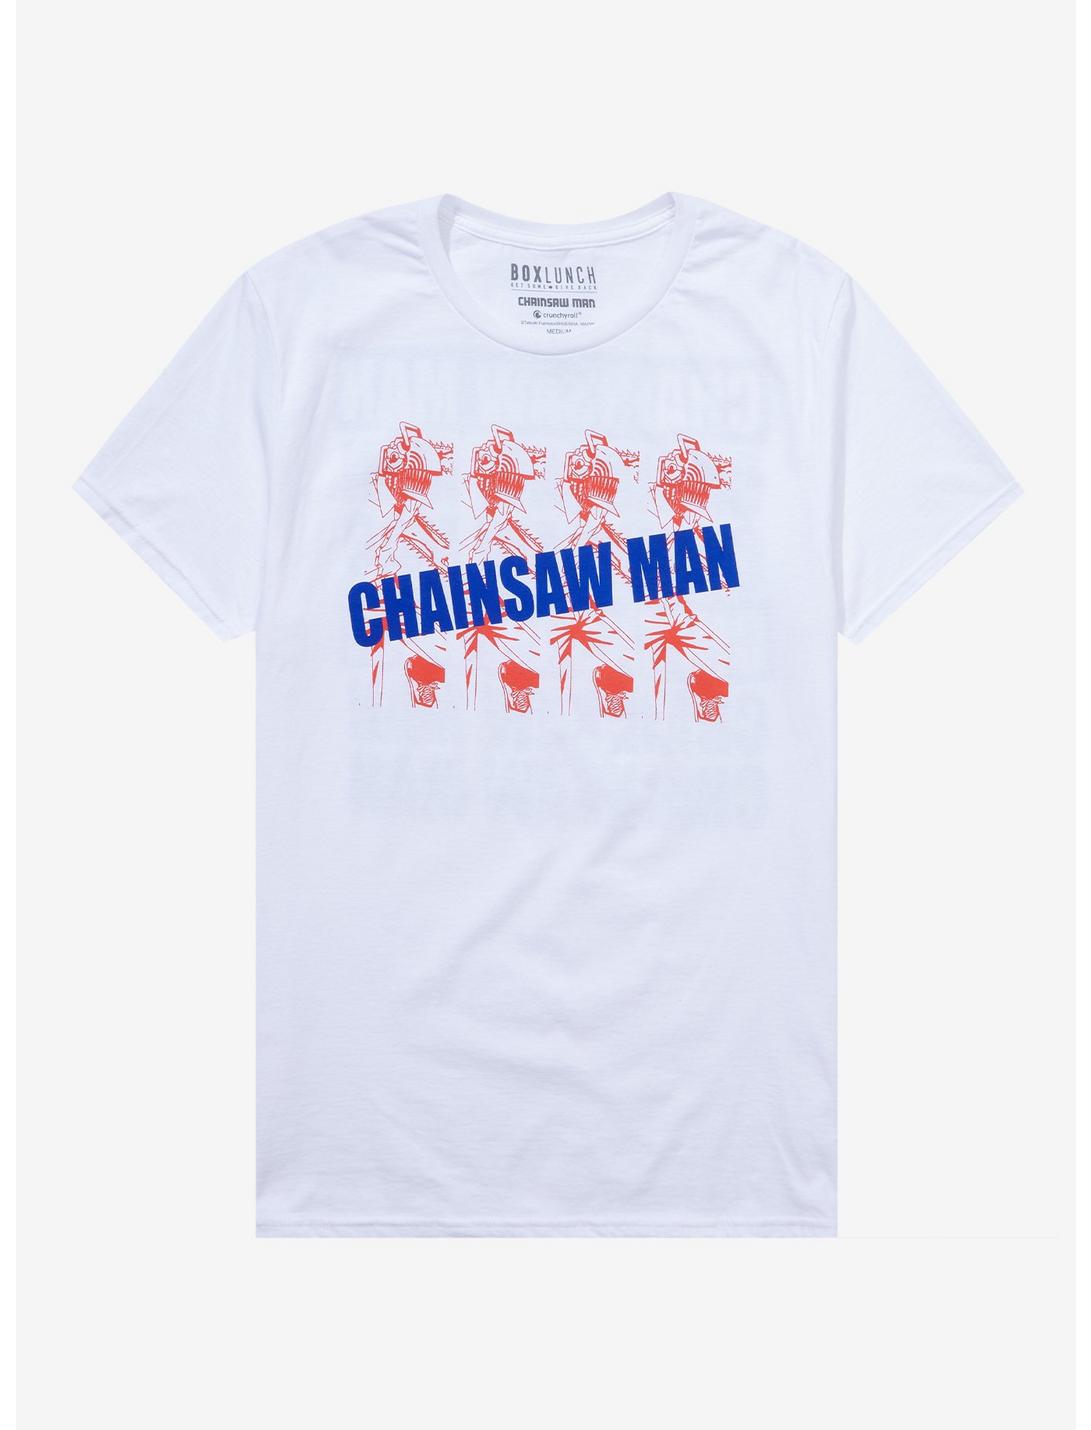 Chainsaw Man Tonal Graphics T-Shirt - BoxLunch Exclusive, WHITE, hi-res